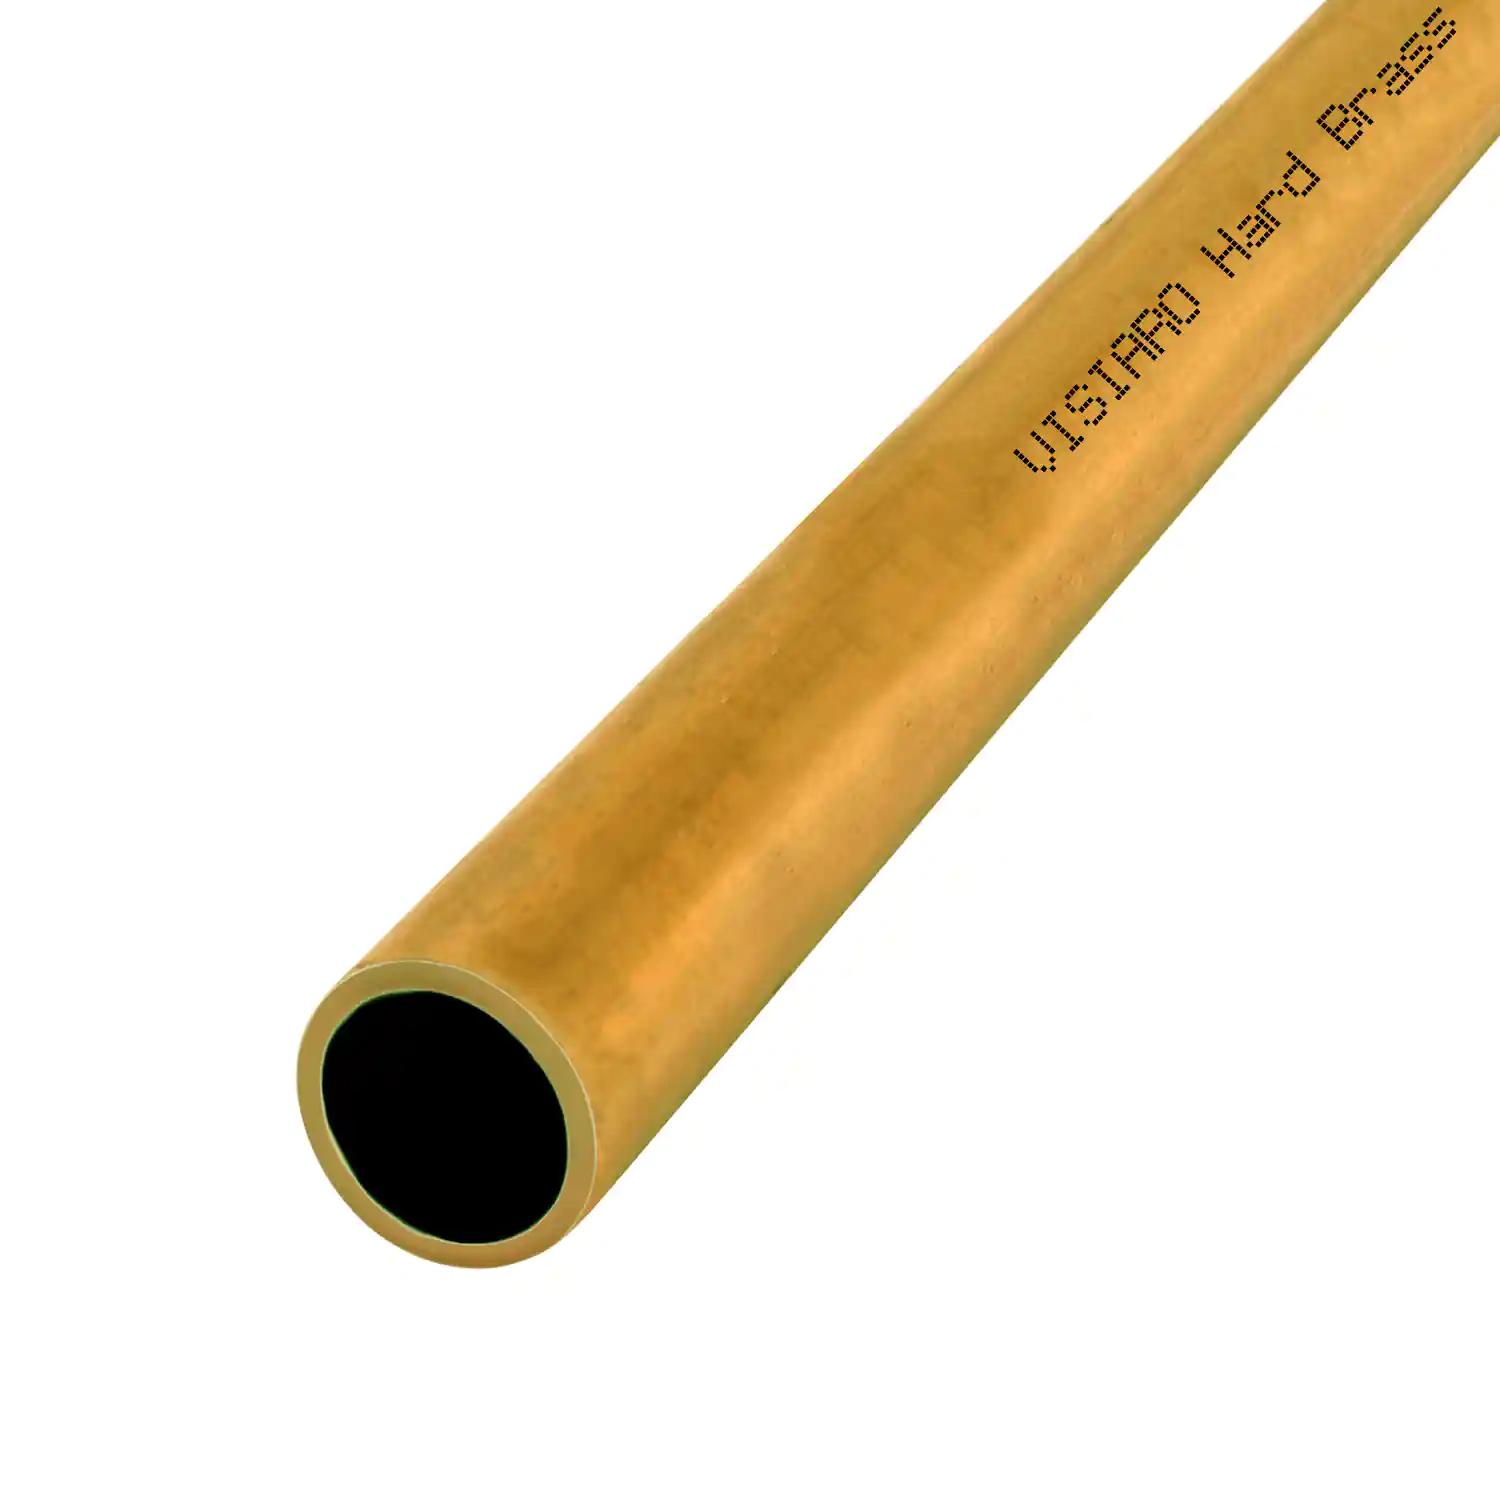 Visiaro Hard Brass Tube, 1mtr, Outer Dia 2 inch, Wall Thickness 16 swg,  Pack of 1